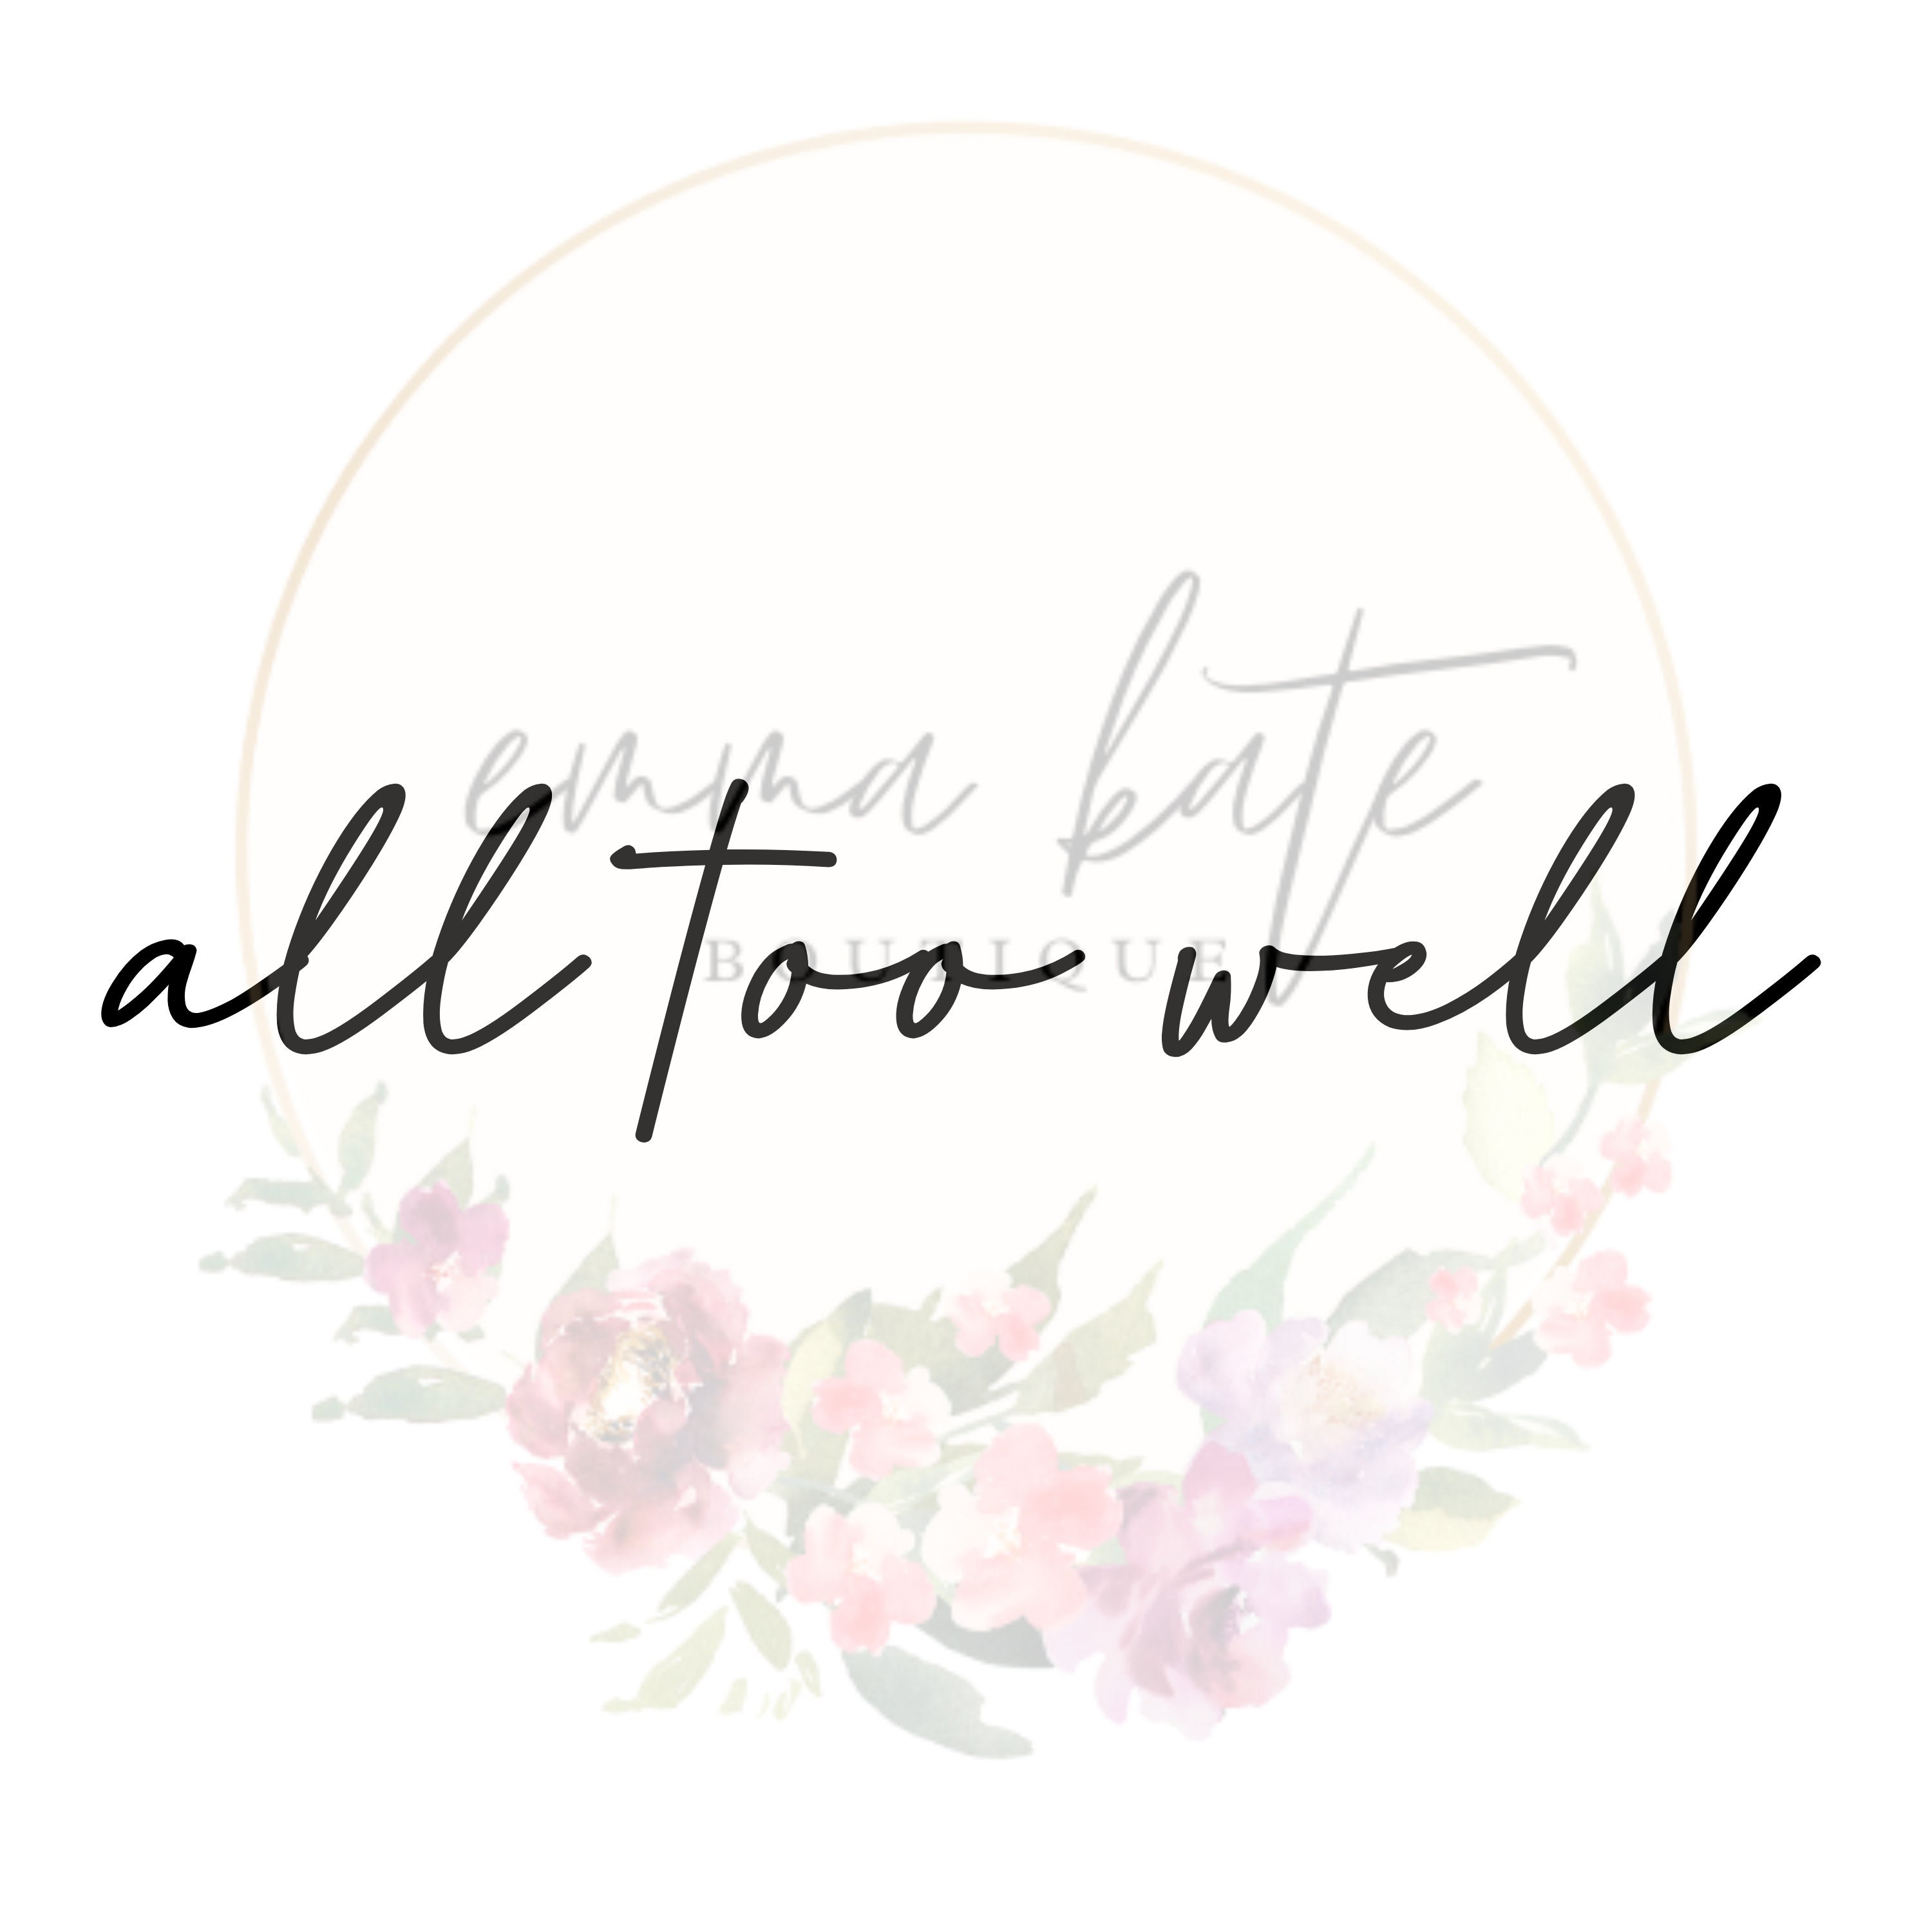 Taylor Swift  All Too Well Requested by gayatrit  Tumbex